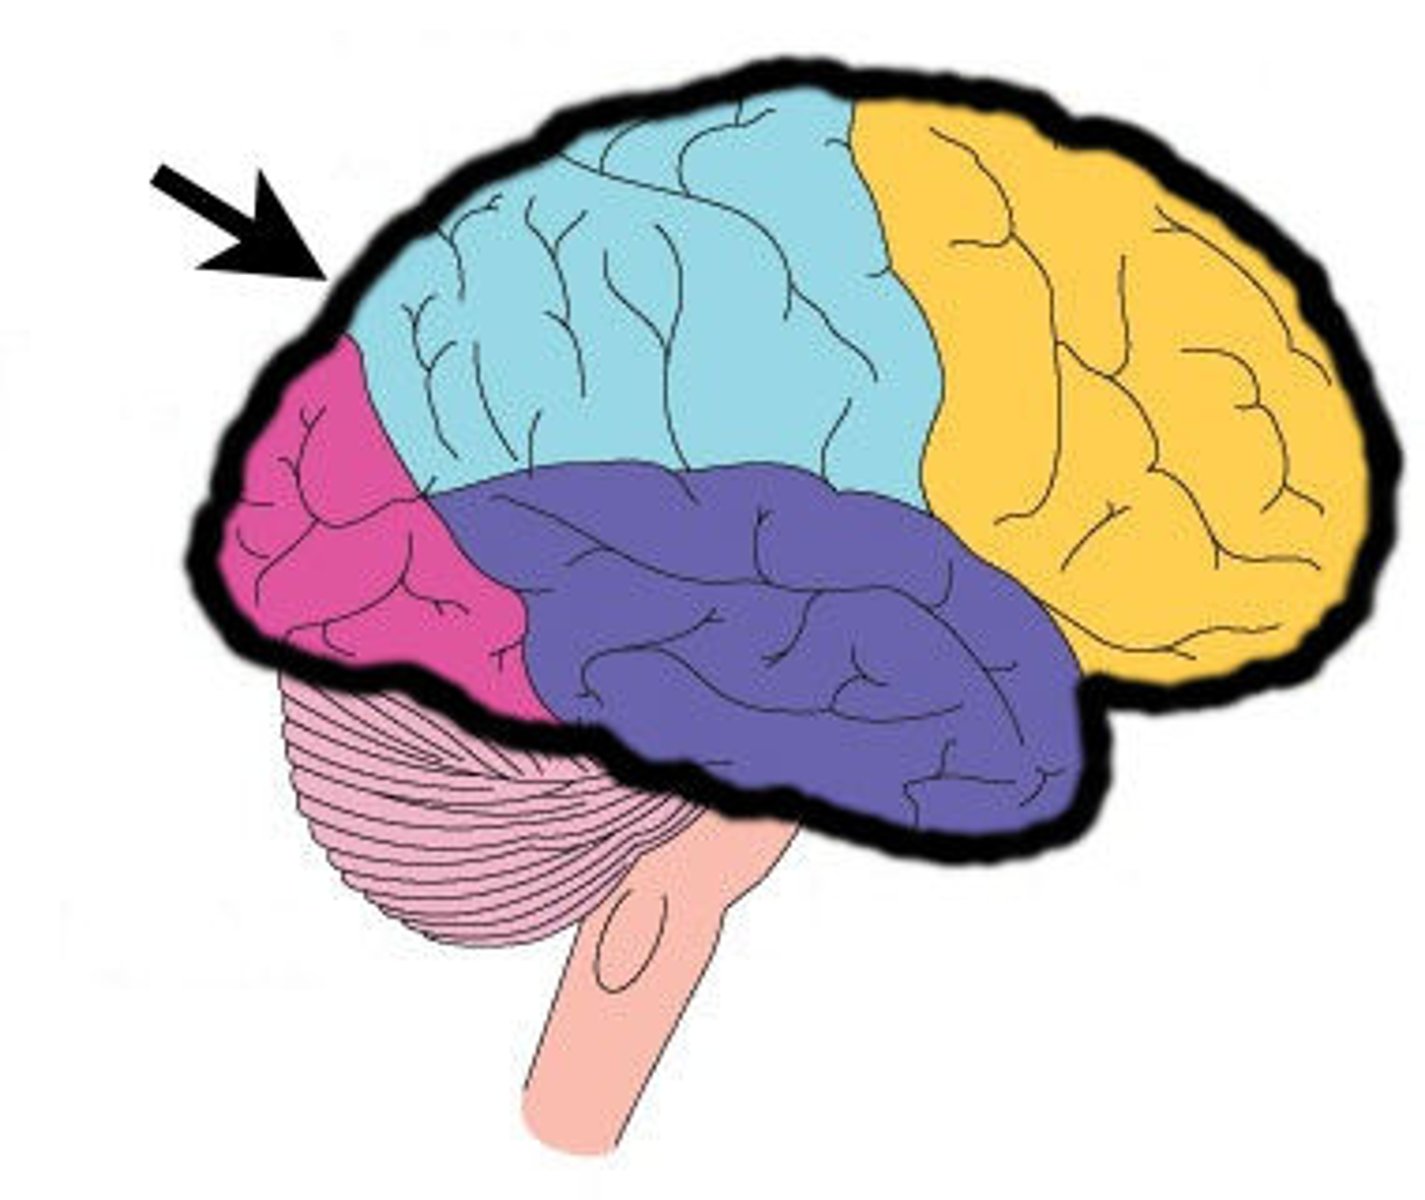 <p>wrinkled, gray covering of the brain that accounts for 80% of brain weight is responsible for complex processing of information, planning, learning, memory storage, etc.</p>